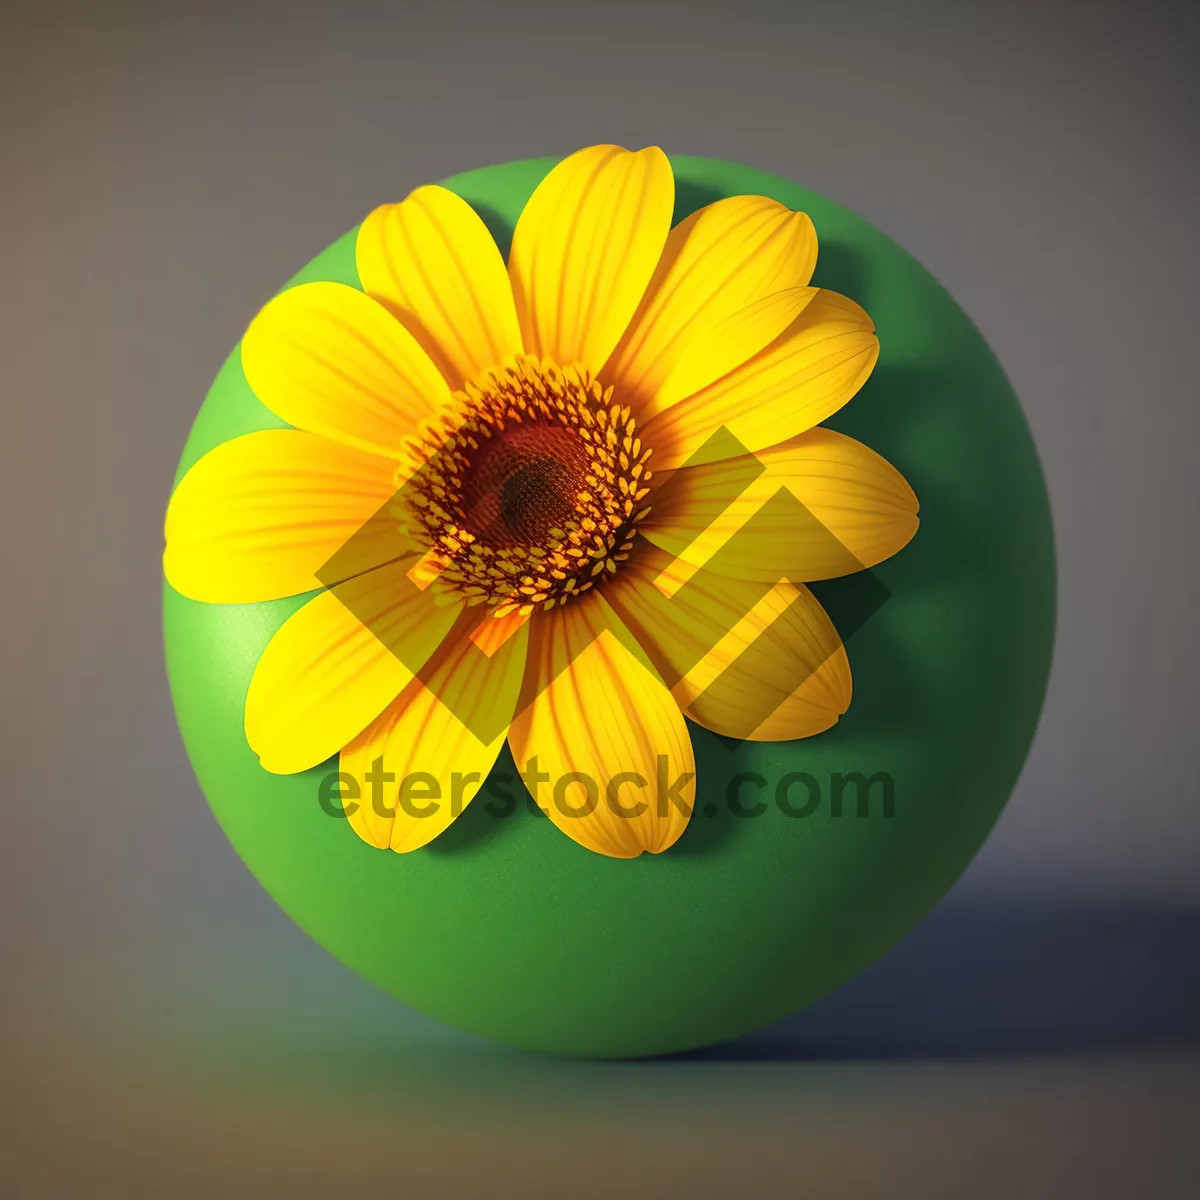 Picture of Vibrant Sunflower Blooming in Summer Garden